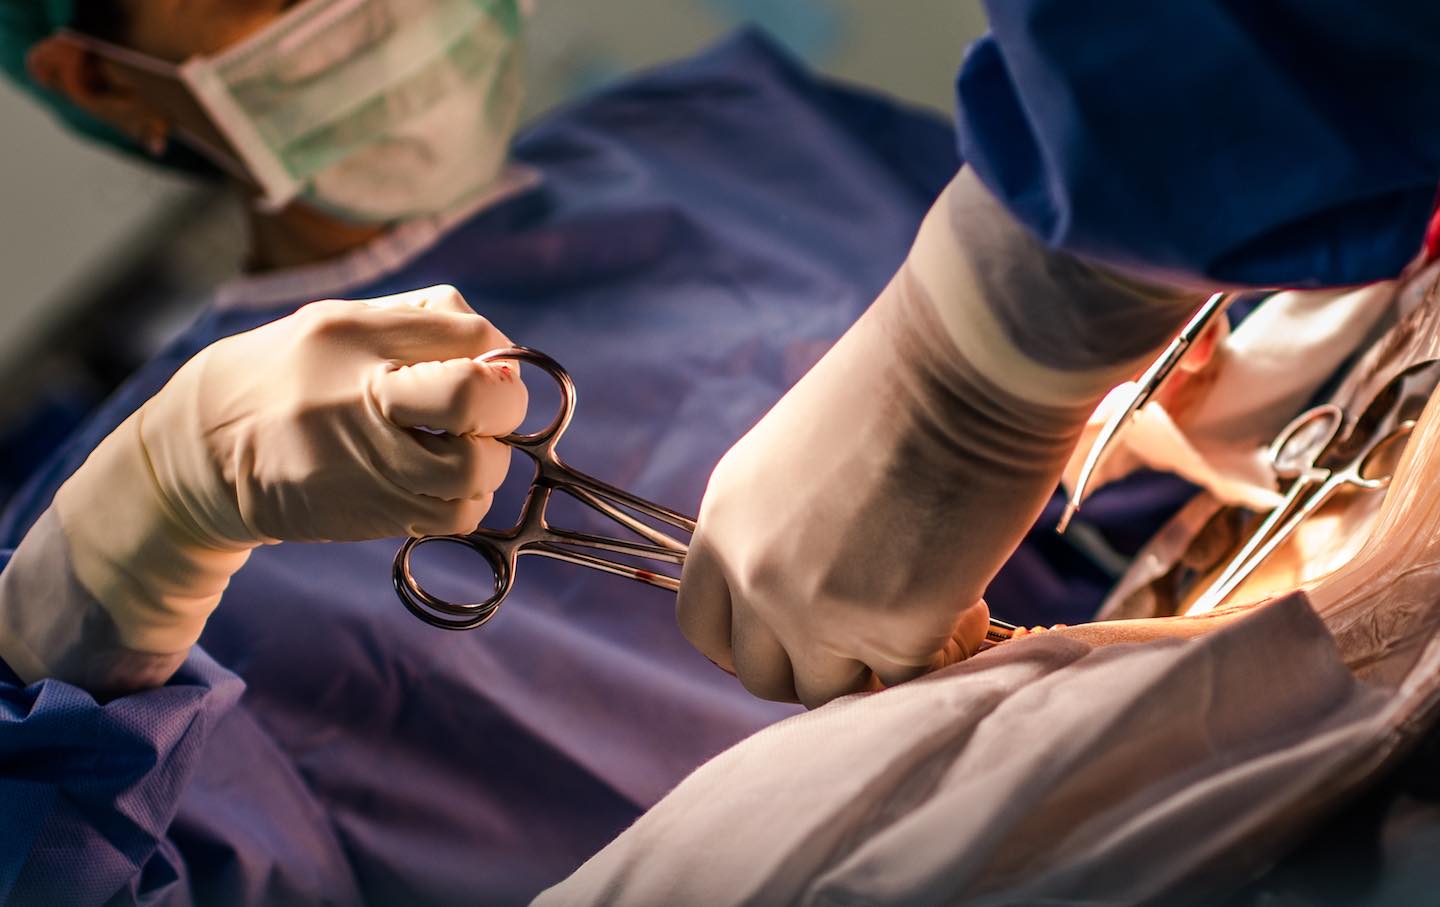 Surgeons performing a “classic cesarean section.”